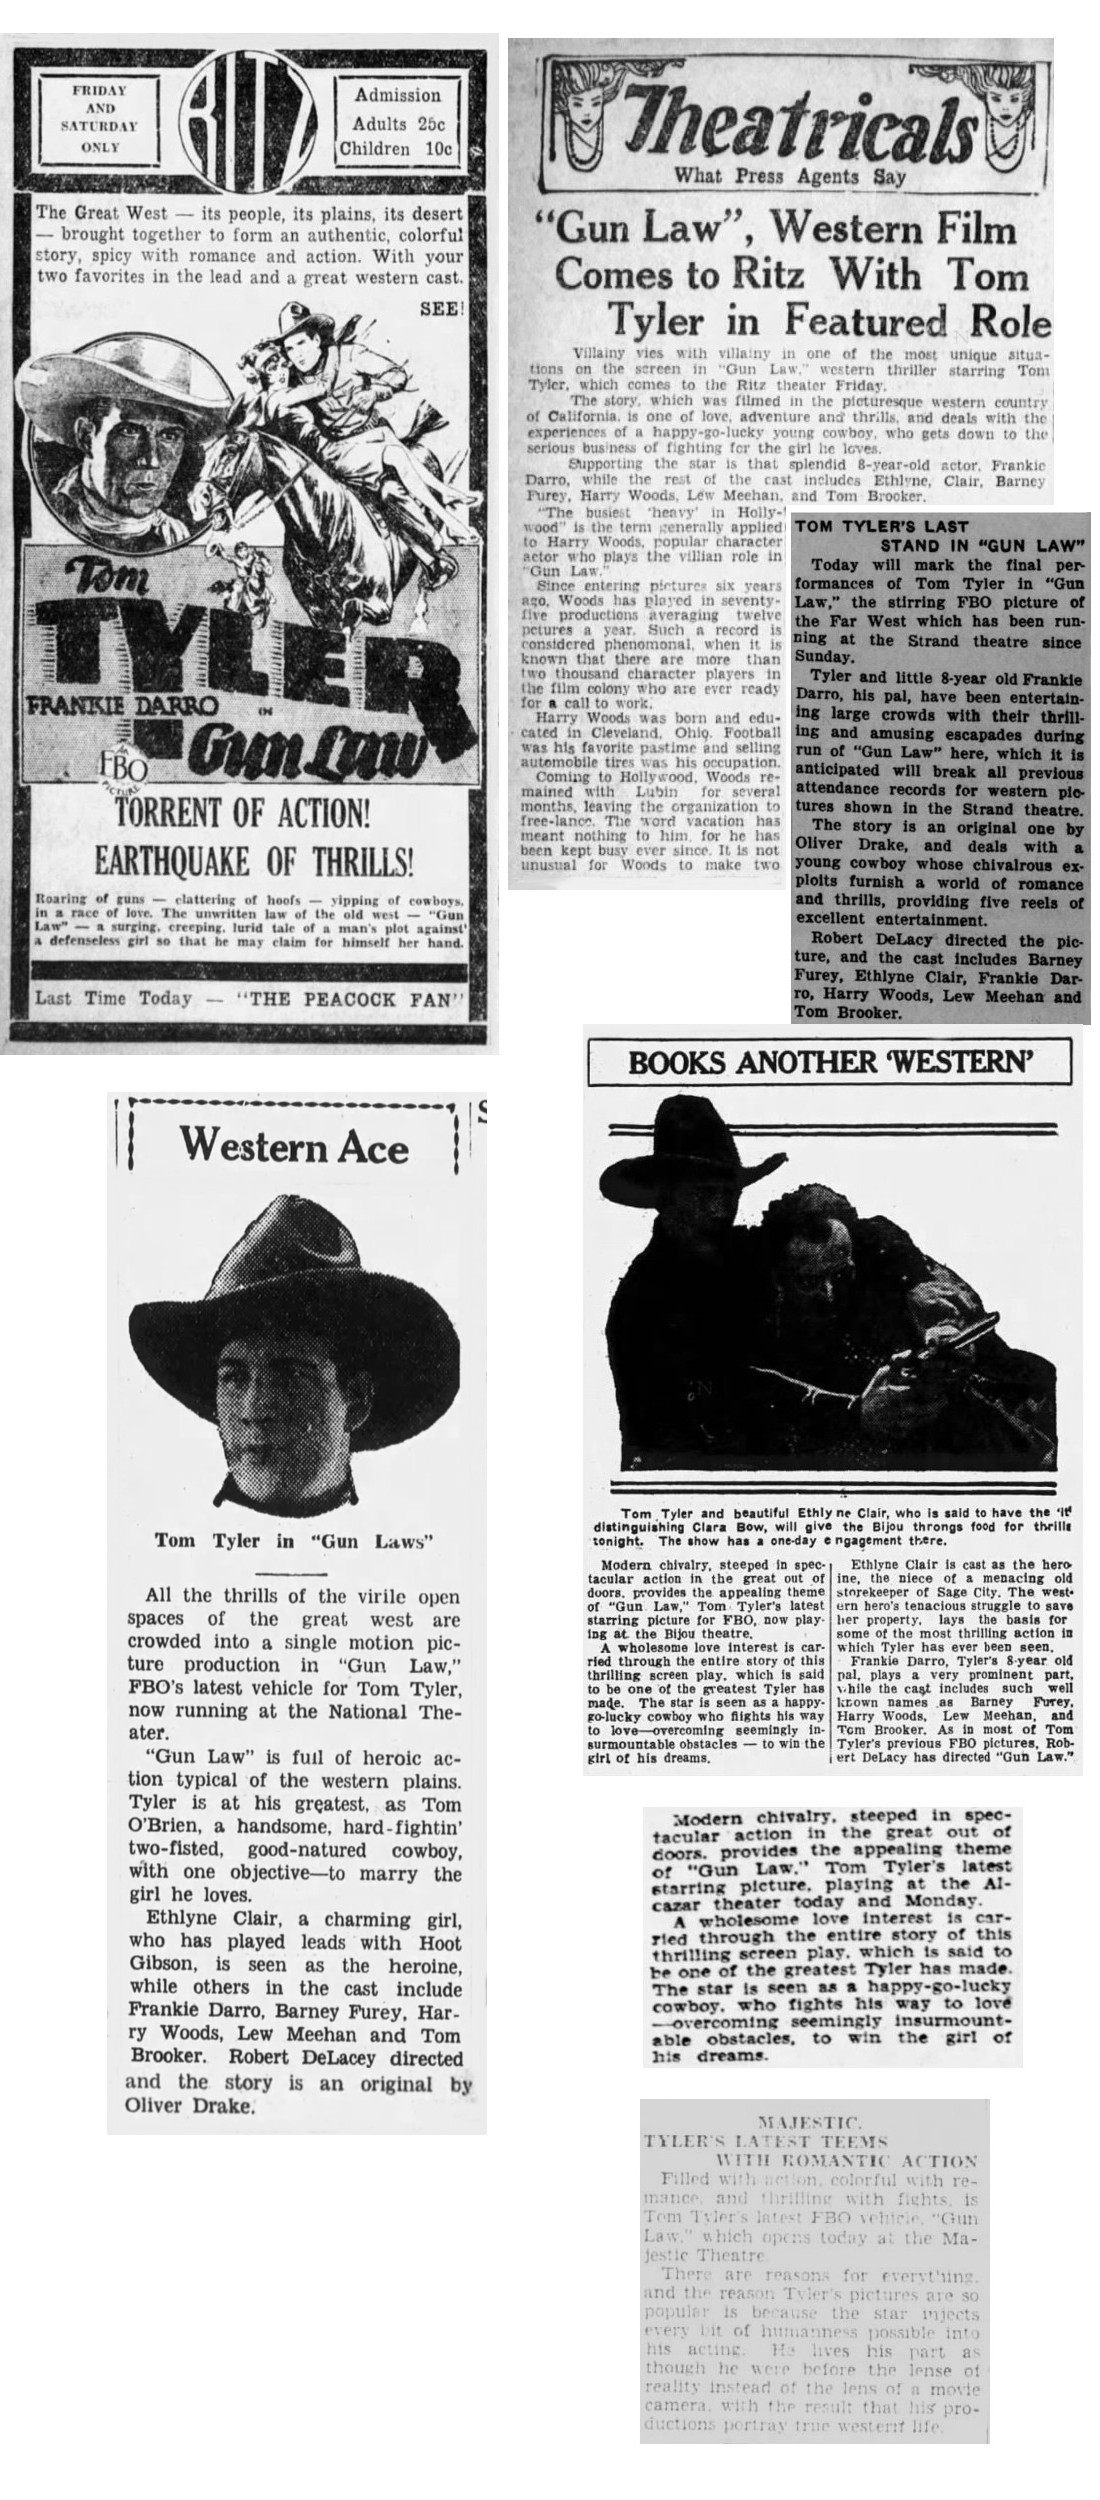 Gun Law pictures of Tom Tyler film reviews cinema ads